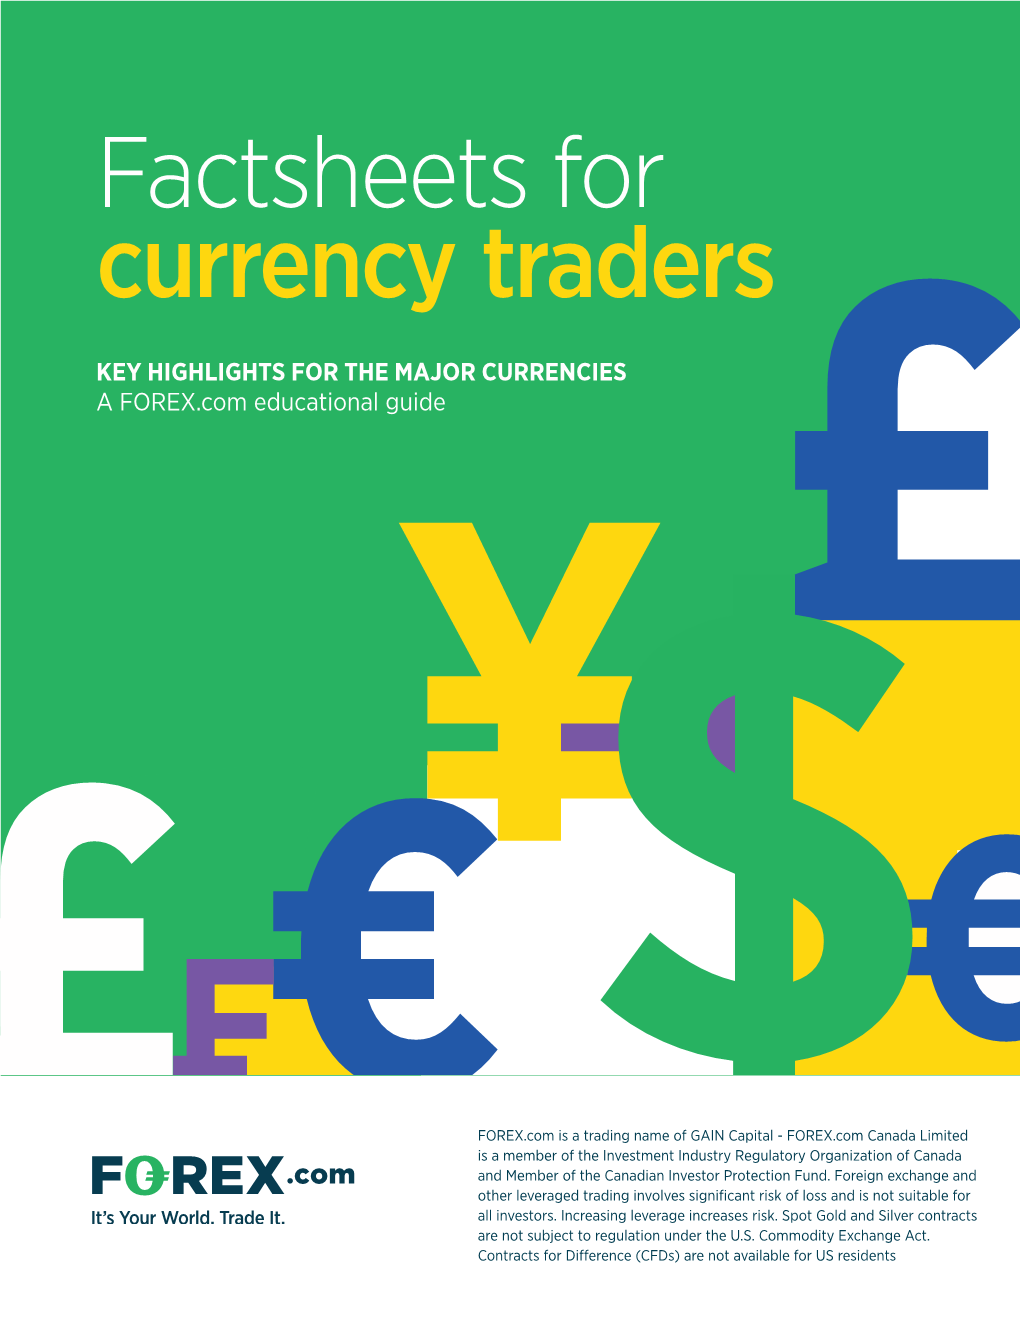 Factsheets for Currency Traders